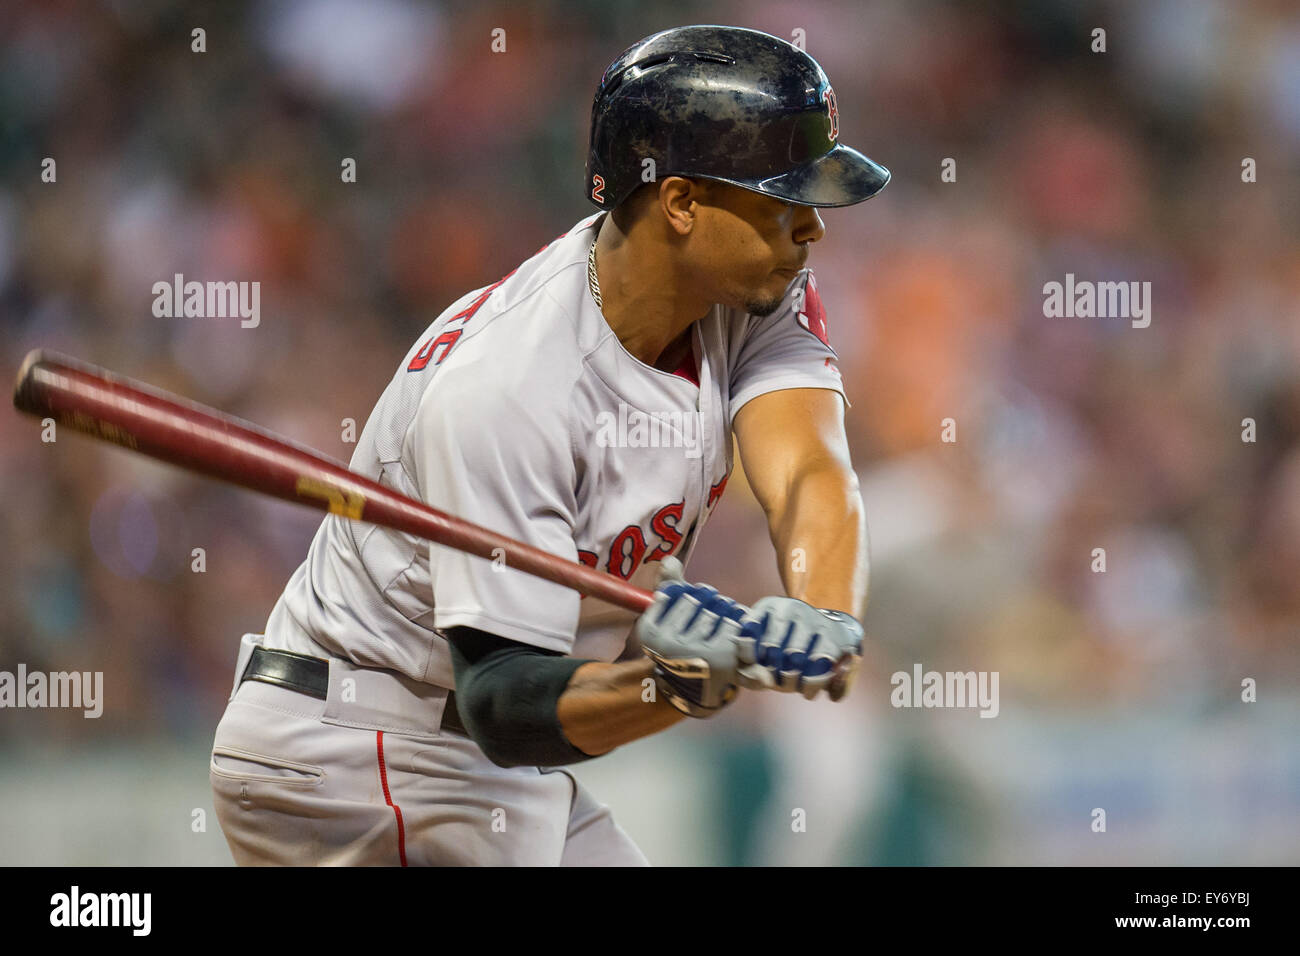 Houston, TX, USA. 22nd July, 2015. Boston Red Sox shortstop Xander Bogaerts (2) bats during the 4th inning of a Major League Baseball game between the Houston Astros and the Boston Red Sox at Minute Maid Park in Houston, TX. Trask Smith/CSM/Alamy Live News Stock Photo